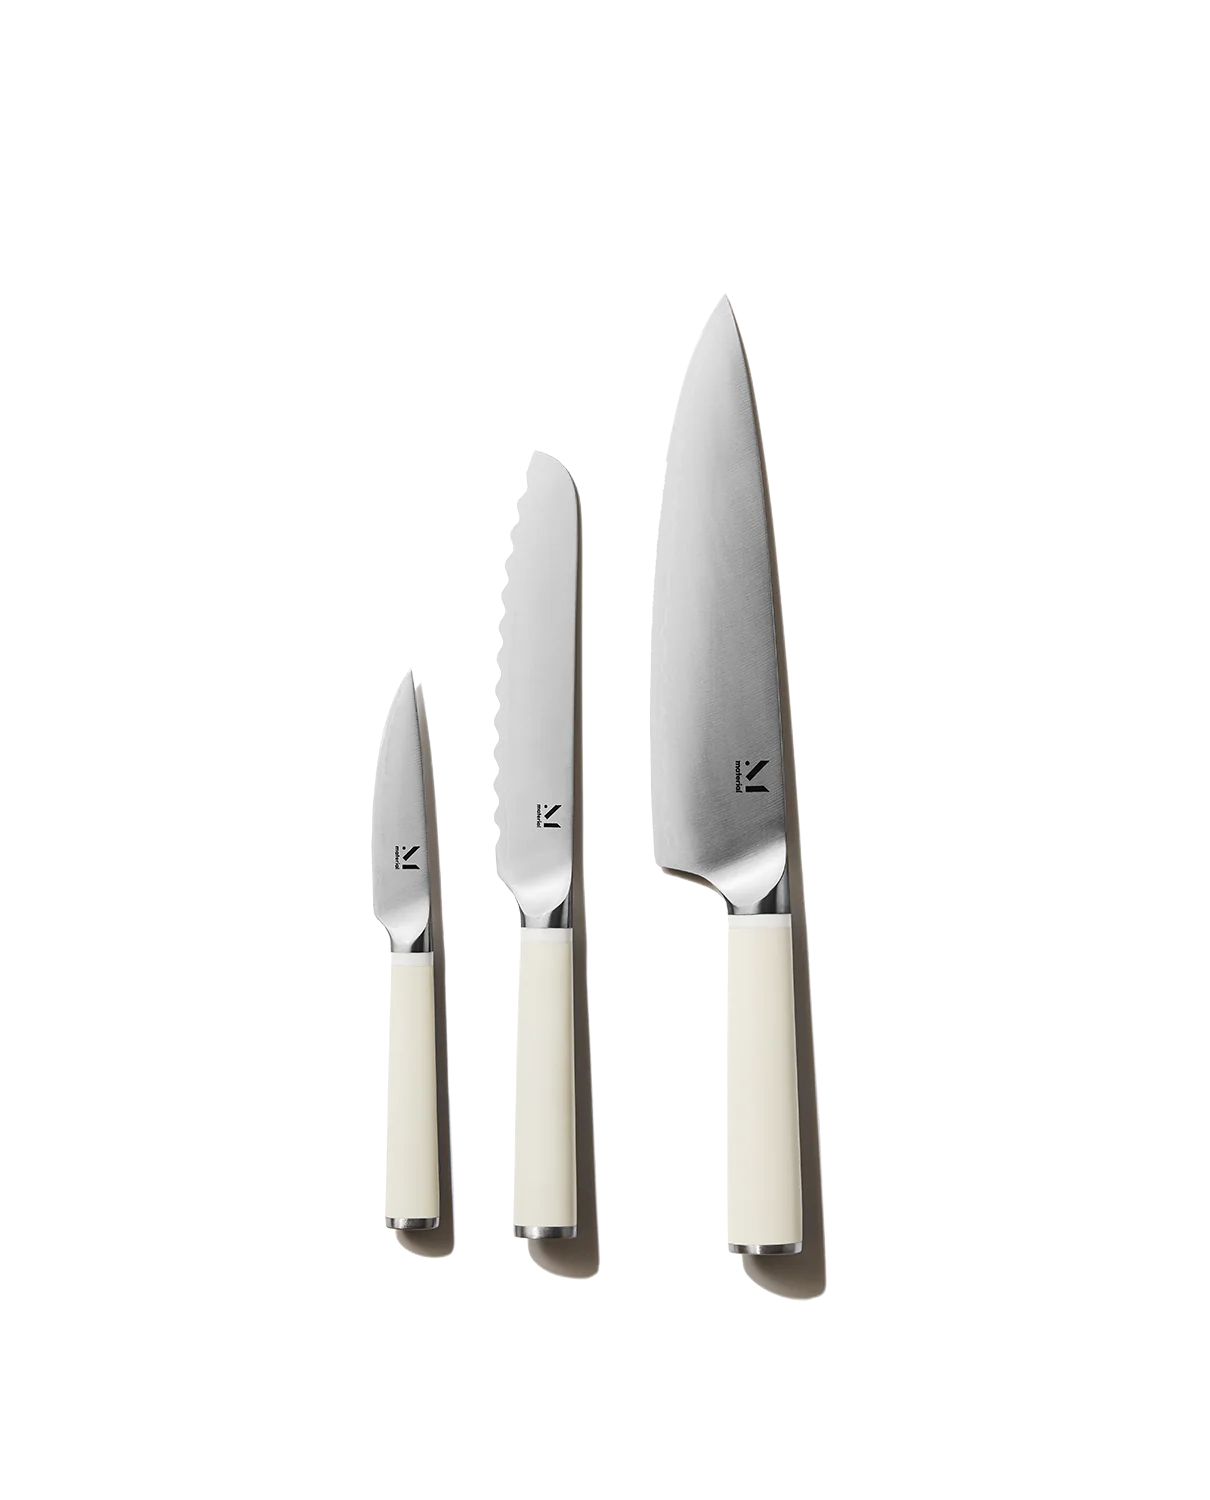 The Trio of Knives | Material